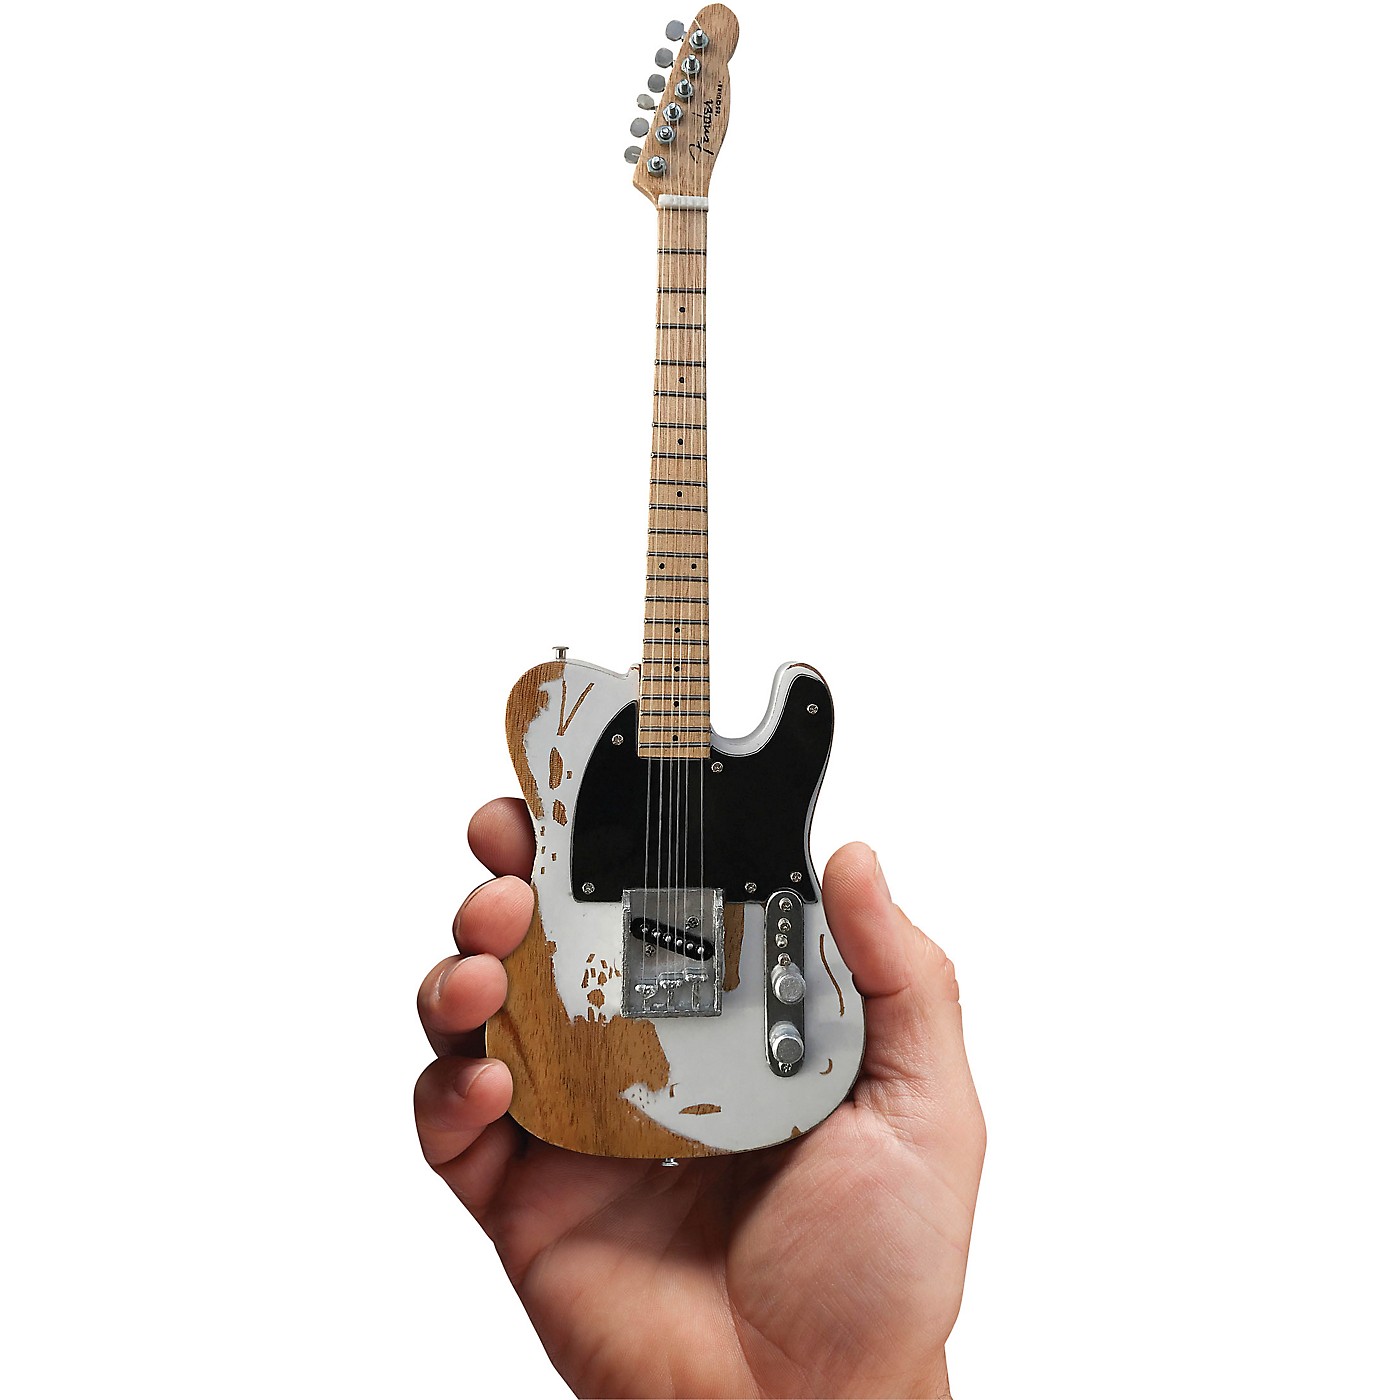 Axe Heaven Fender Telecaster - Vintage Esquire - Jeff Beck Officially Licensed Miniature Guitar Replica thumbnail